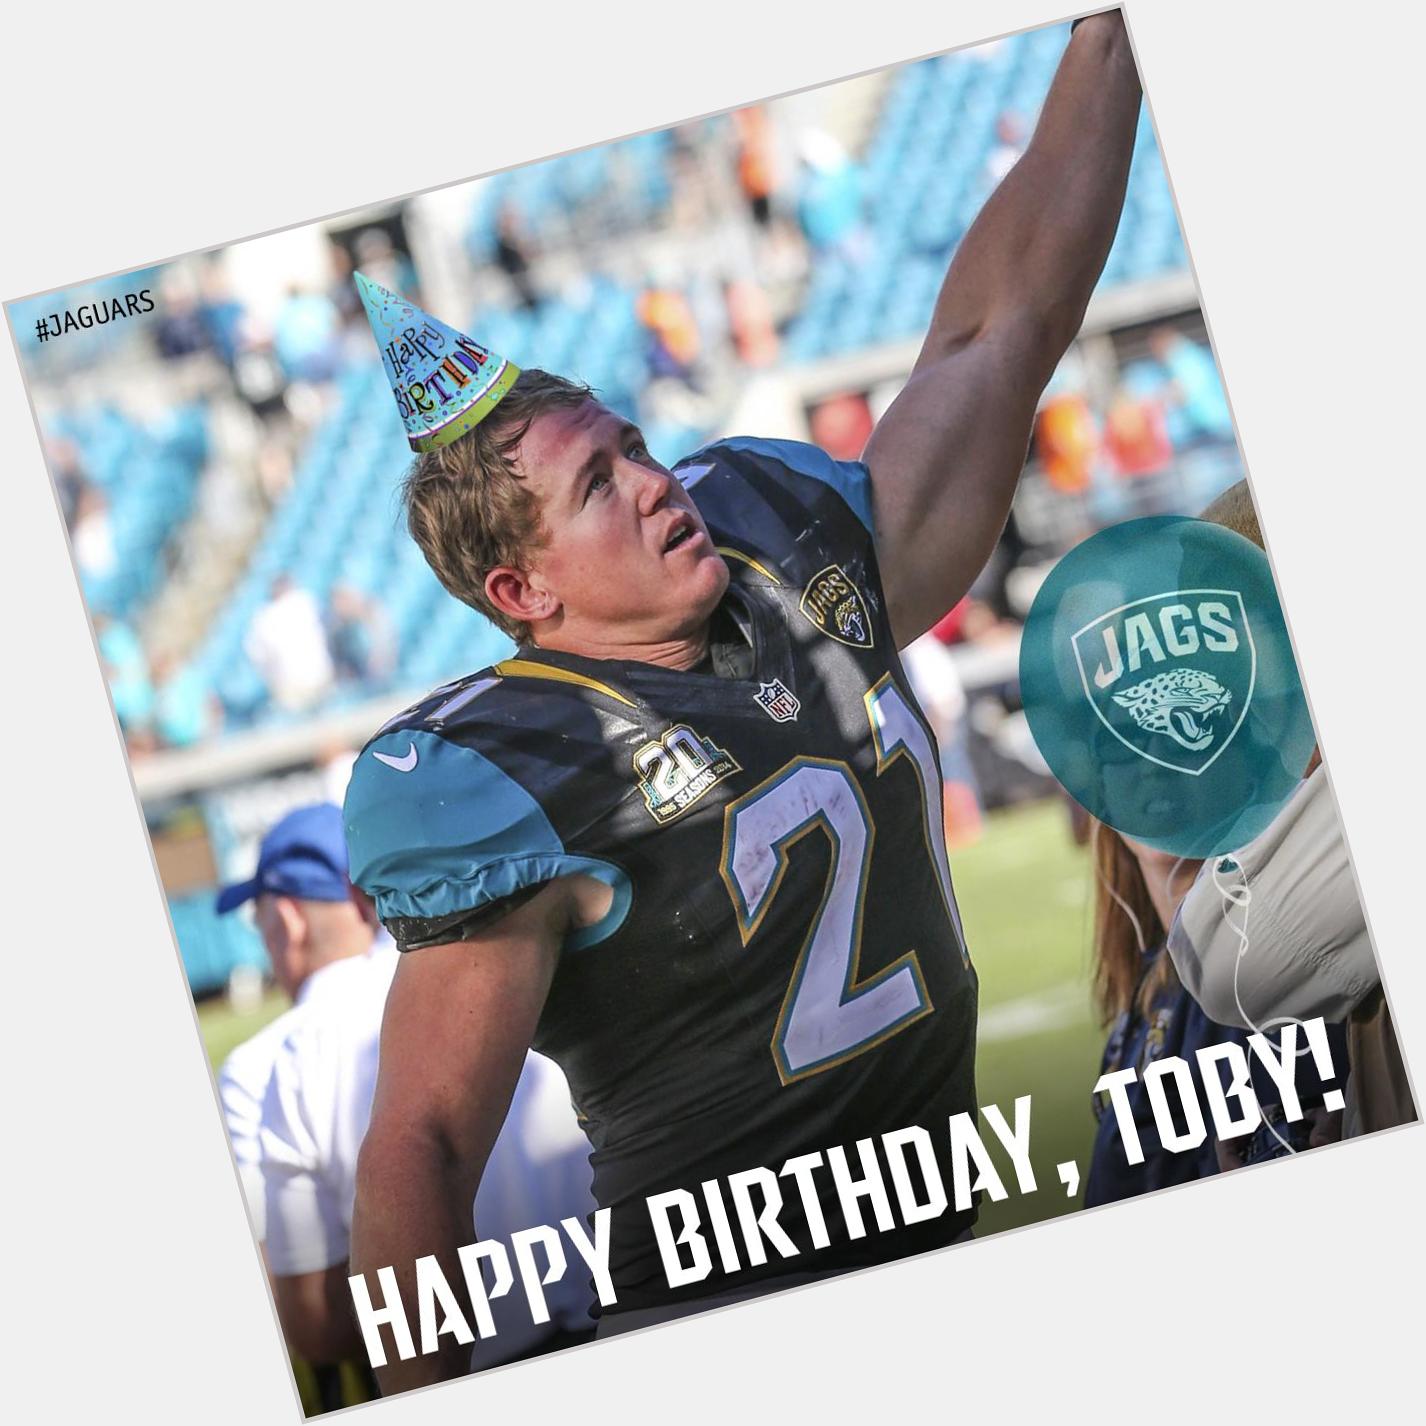 To wish RB a Happy Birthday!

Check out these photos of Toby:  